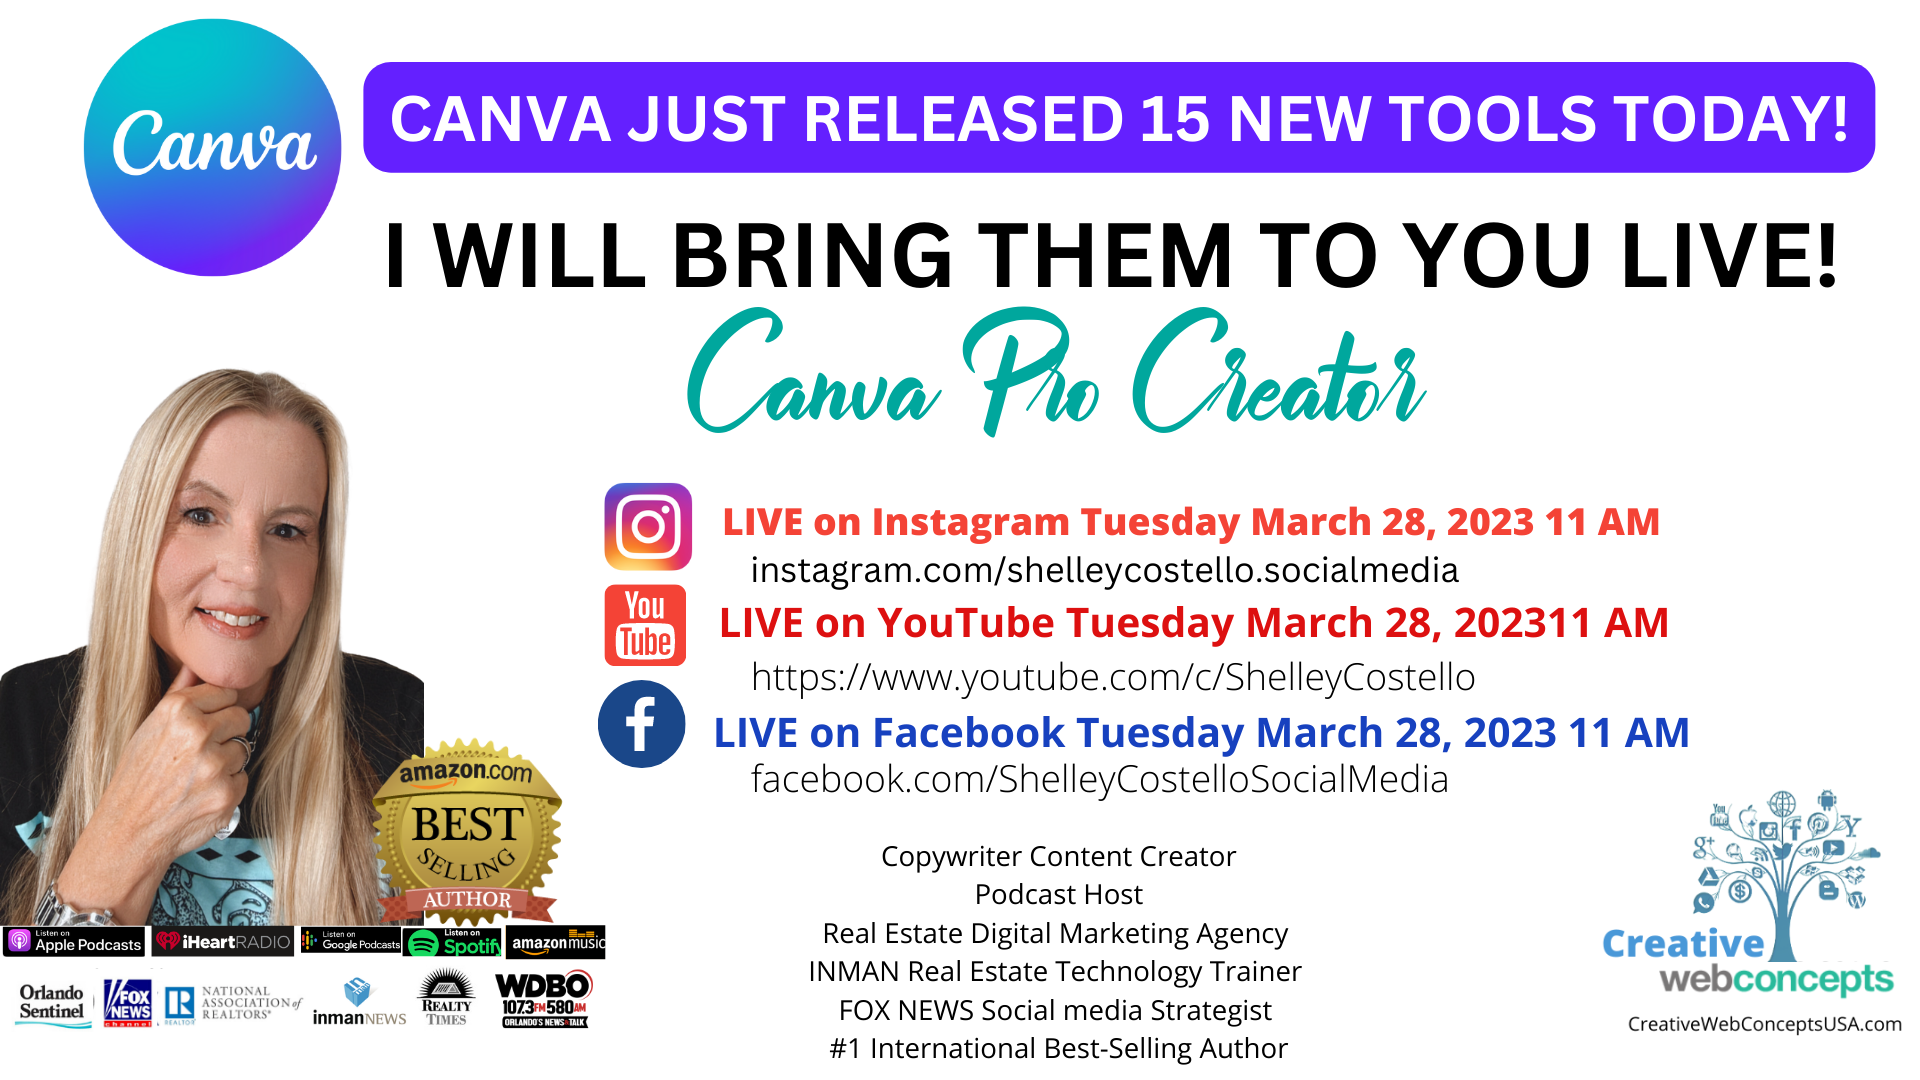 How to get Canva Pro for free in 2023 - Brandveda